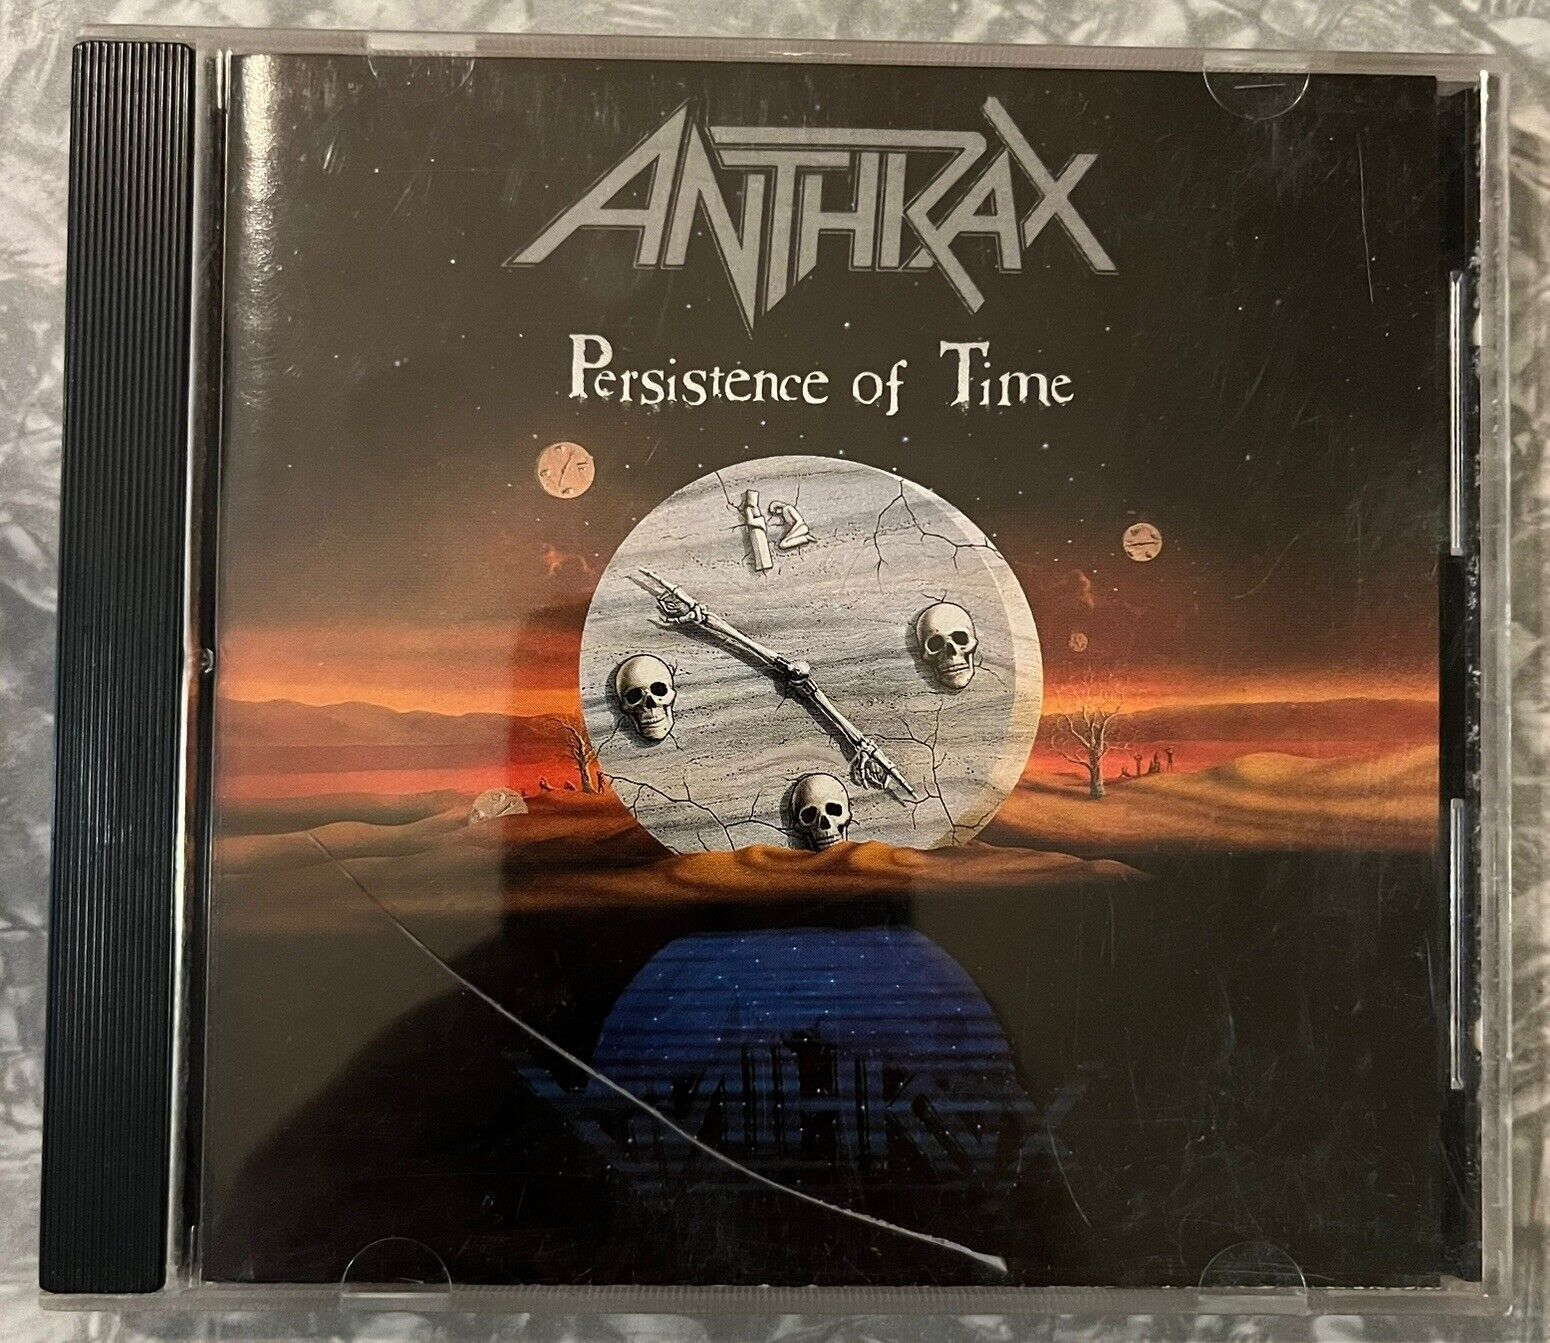 Persistence of Time by Anthrax (CD, 1990) Thrash Metal: Island Records: VG+